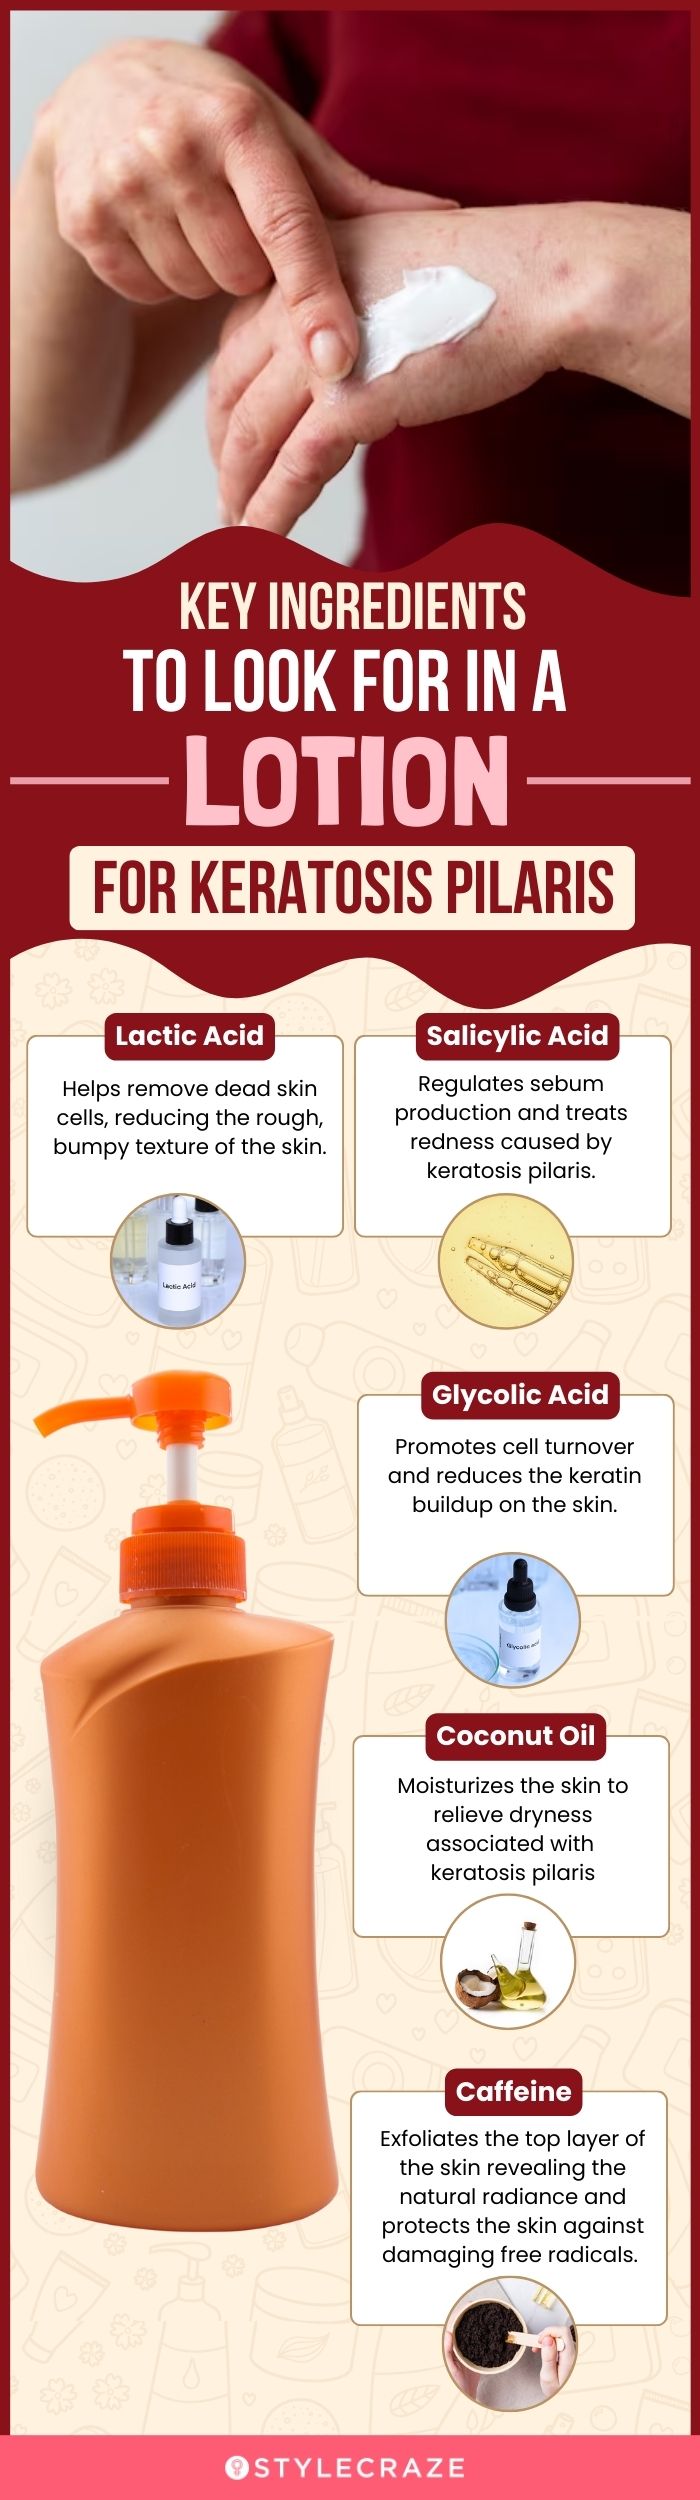 Key Ingredients To Look For In A Lotion For Keratosis Pilaris (infographic)